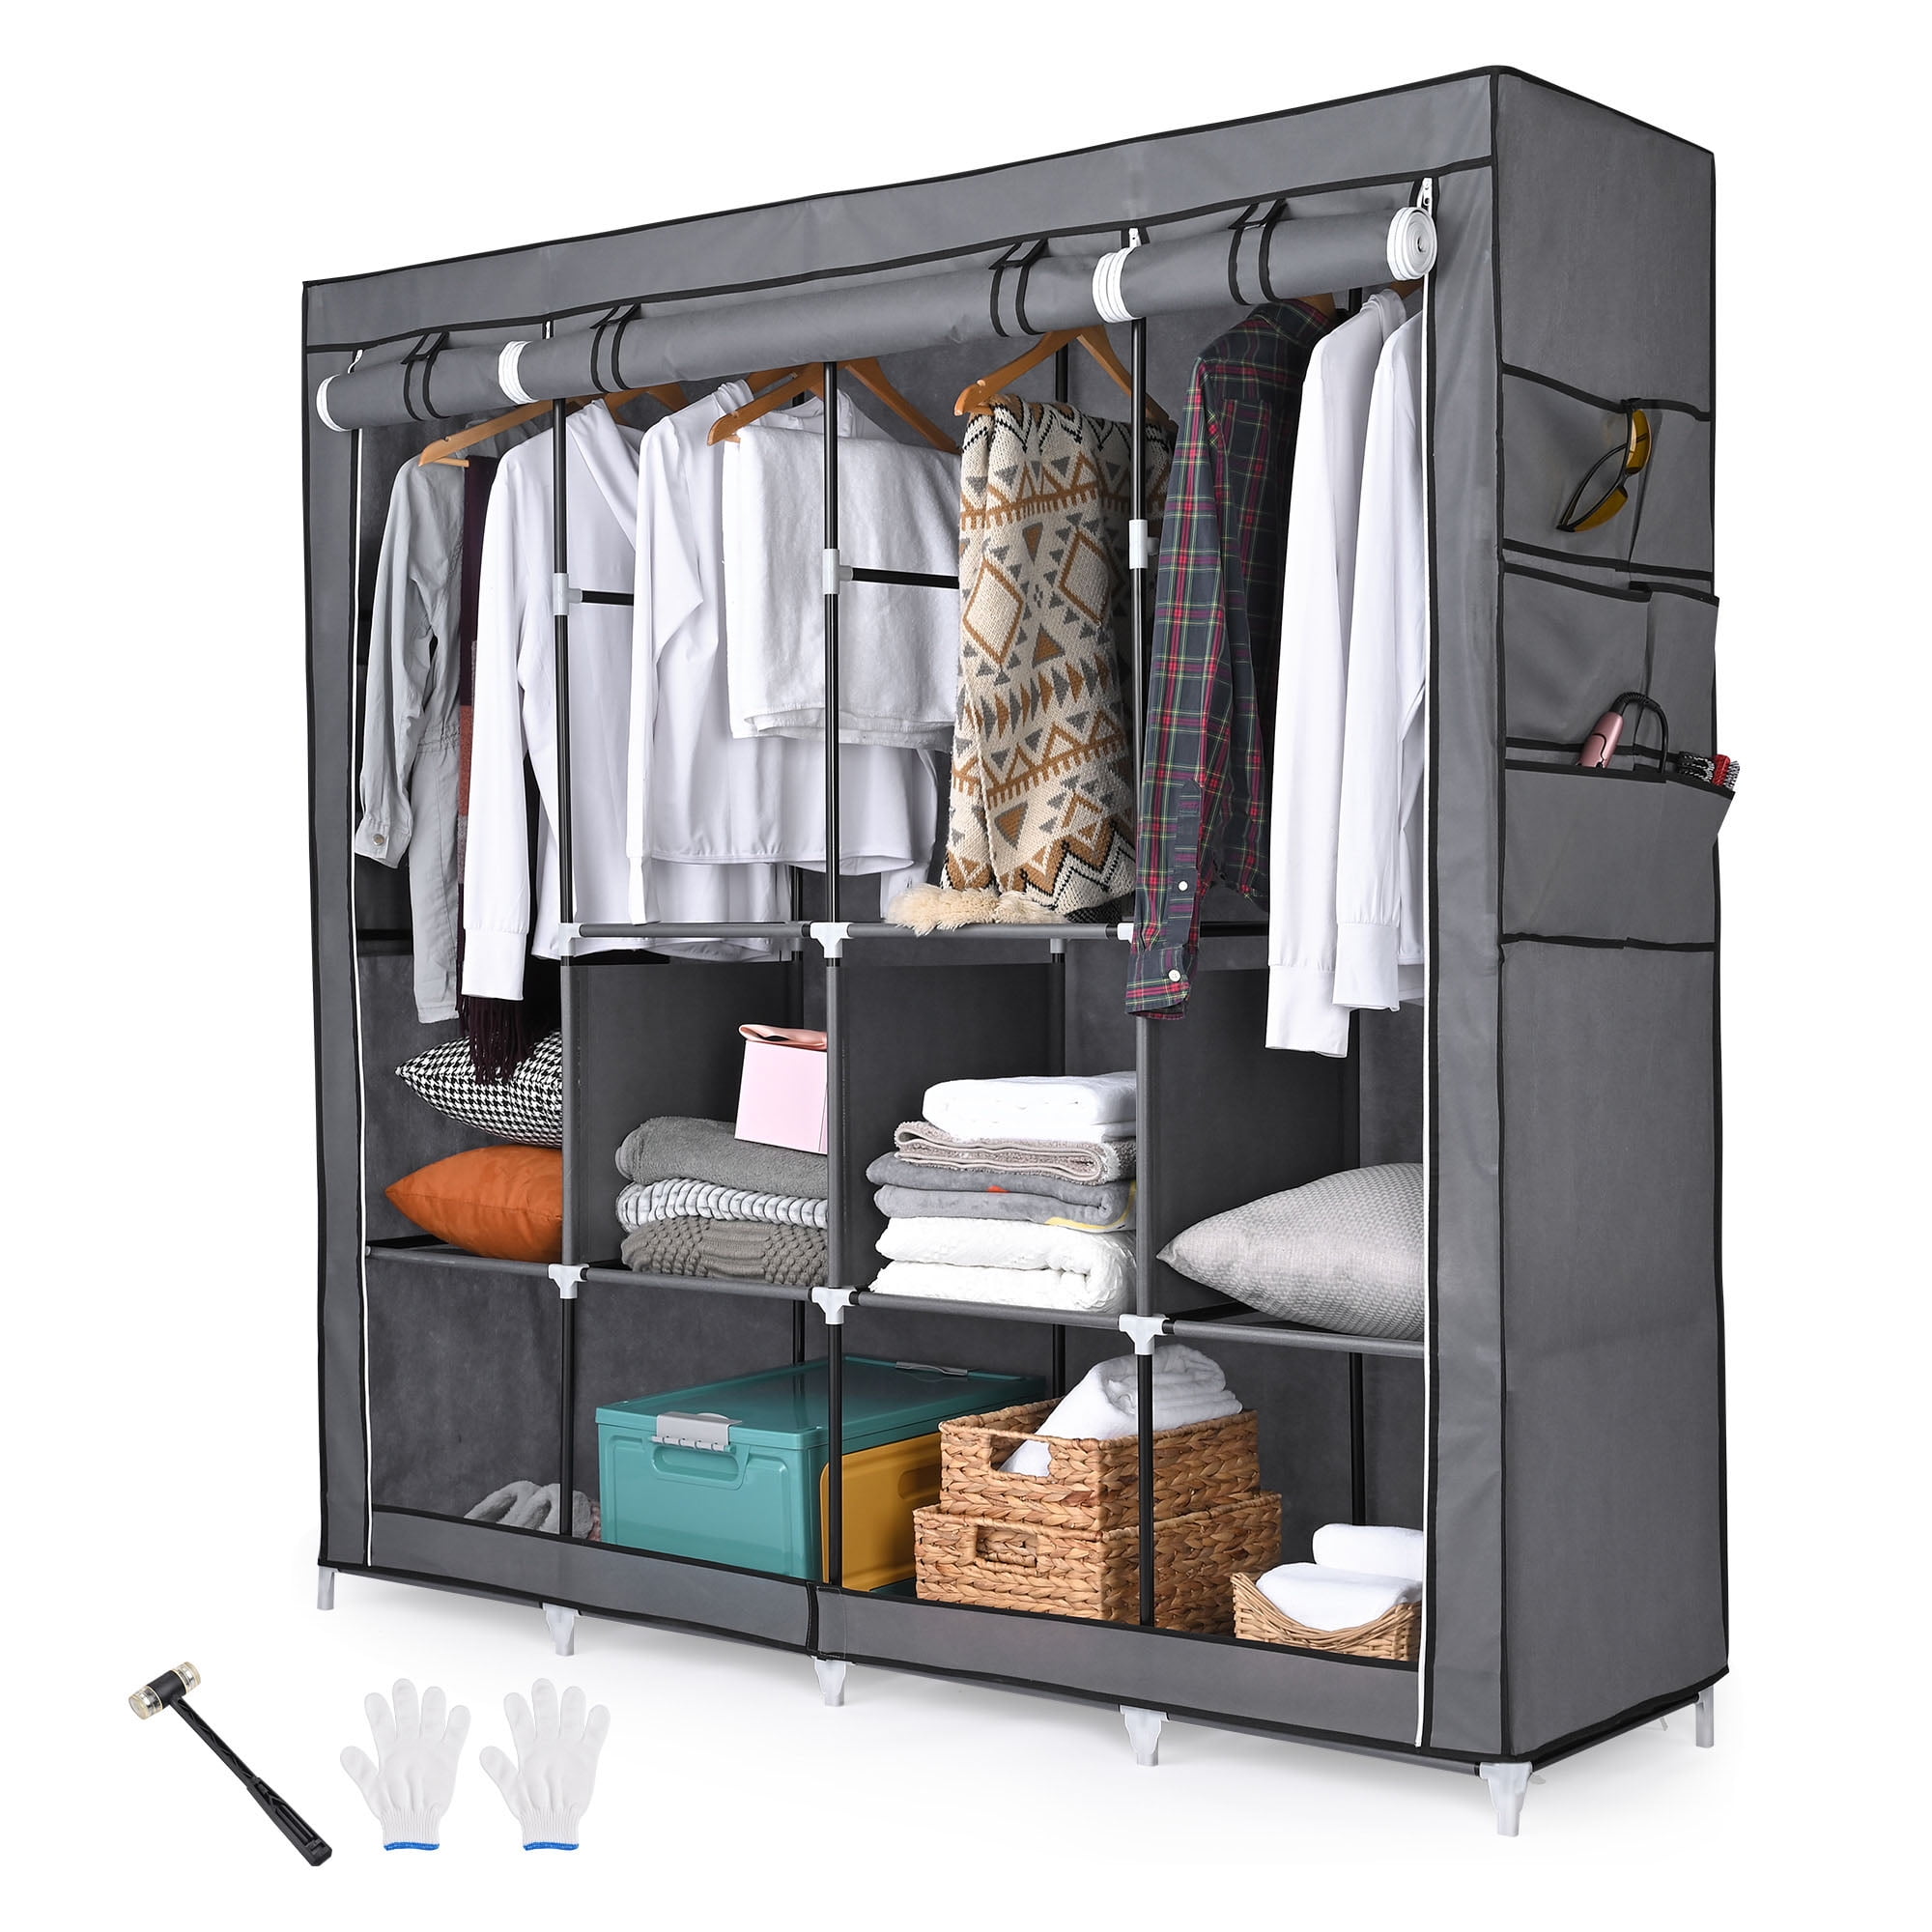 HOMGRNE Portable Closet Wardrobe, Bedroom Clothes Closet Storage  Organizer-4 Storage Shelves, 4 Hanging Rods, Grey Non-Woven Fabric Cover 4  Side